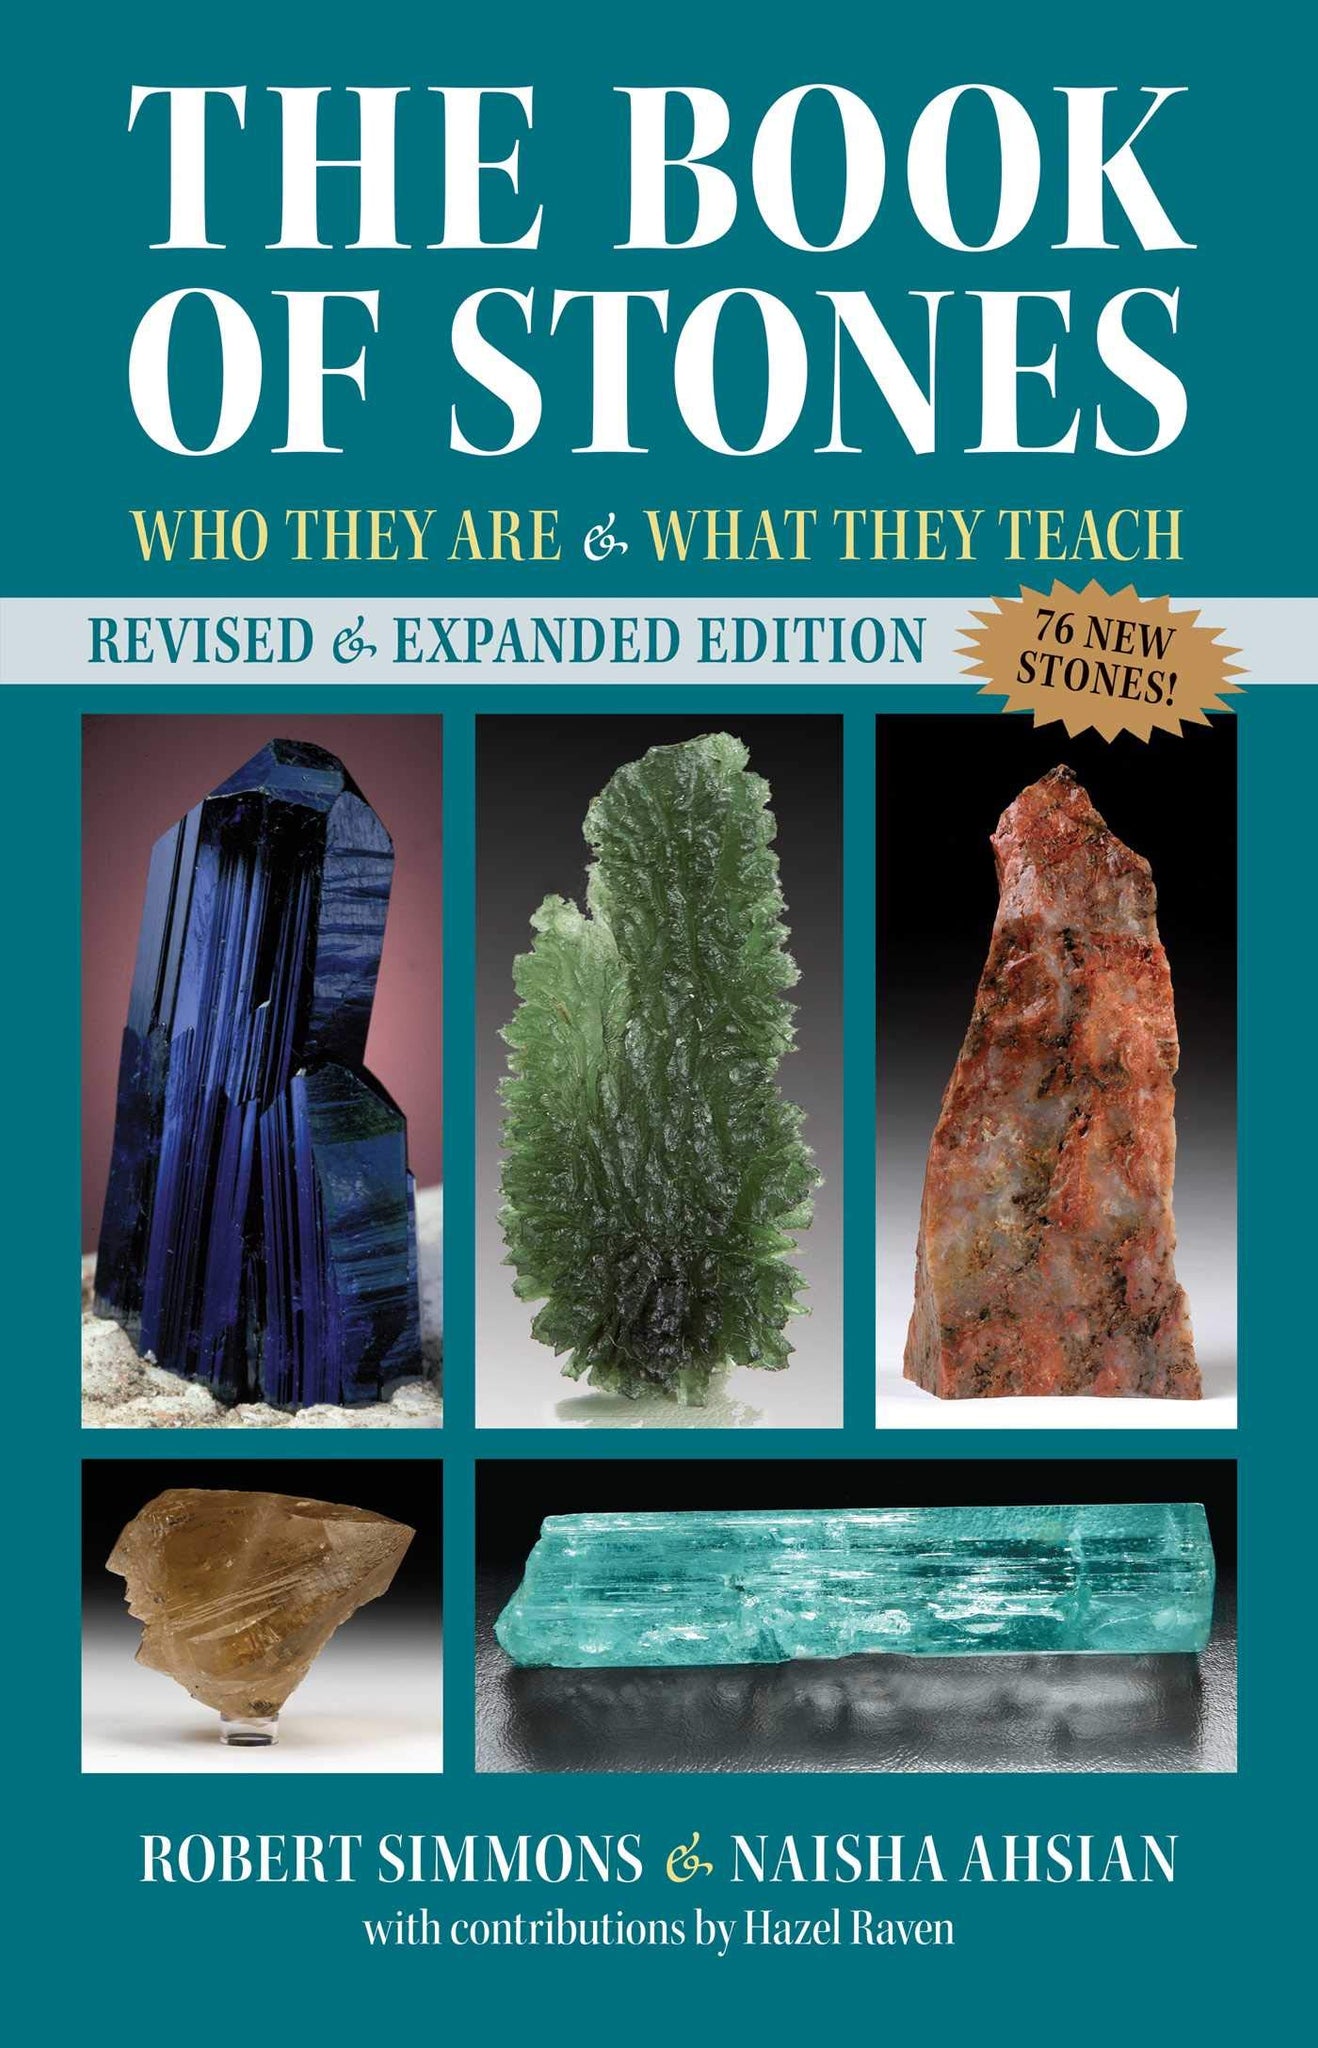 The Book of Stones: Who They Are & What They Teach by Robert Simmons